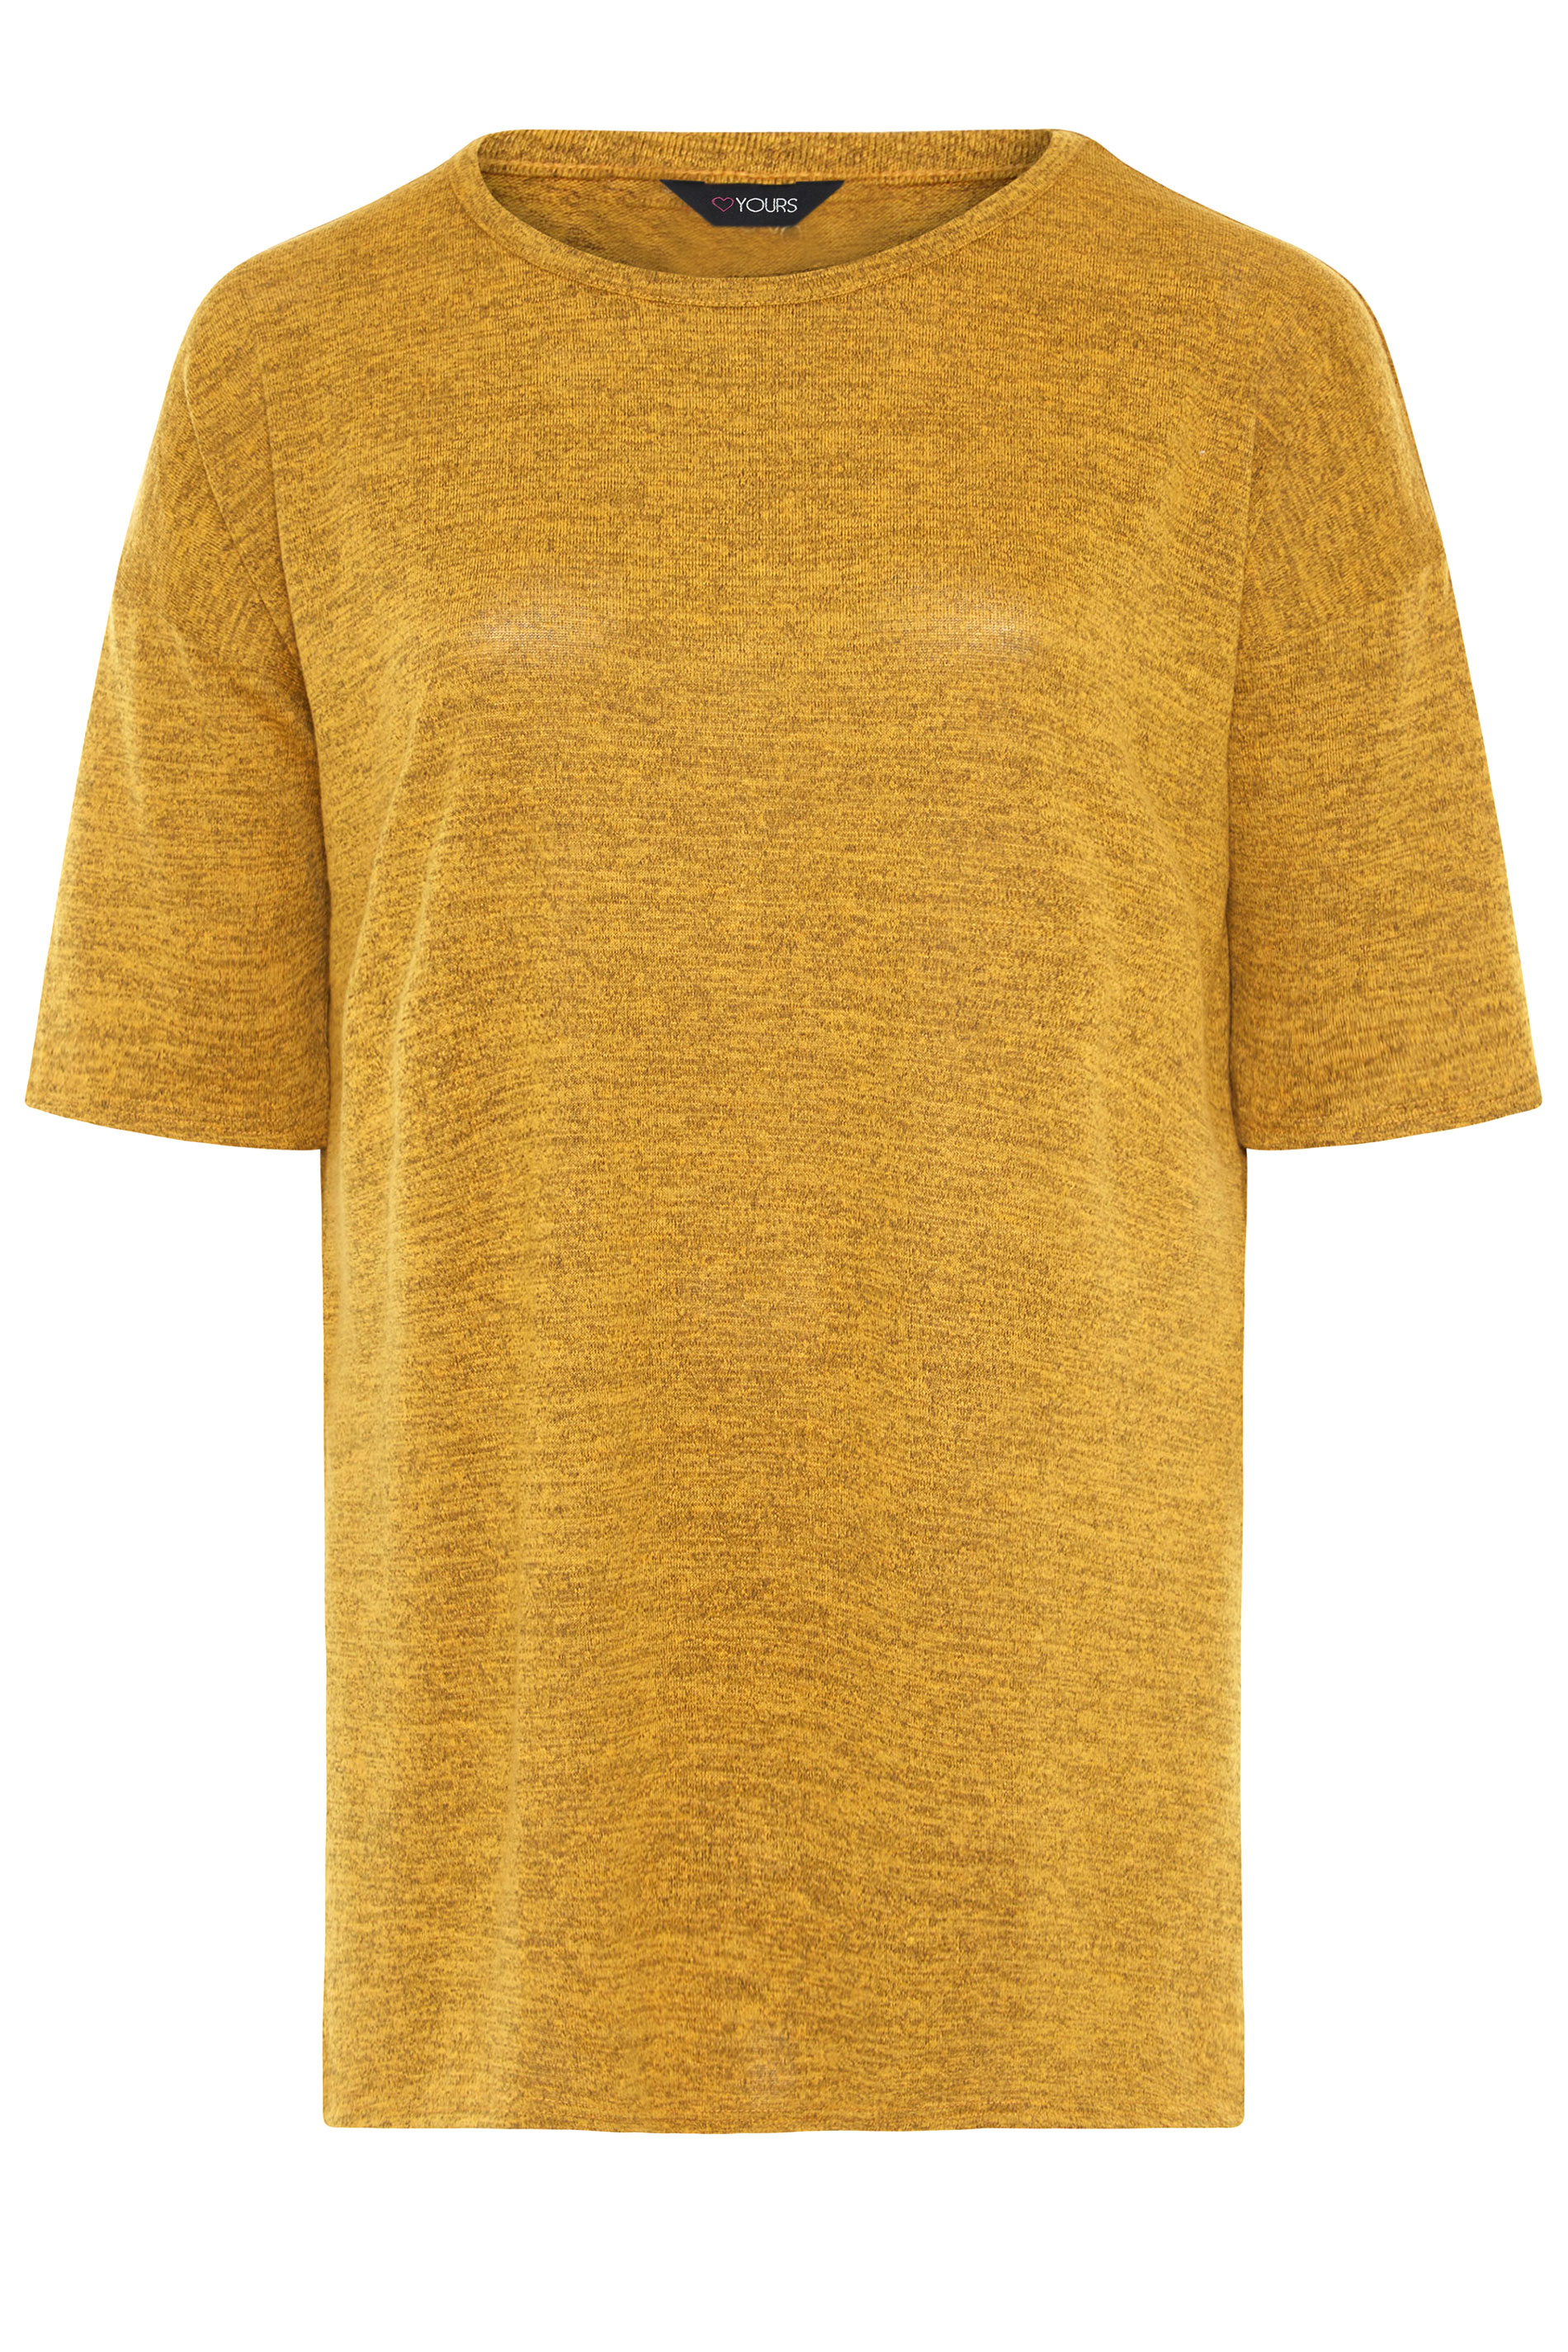 Plus Size Mustard Yellow Marl Oversized Jersey Tee | Yours Clothing